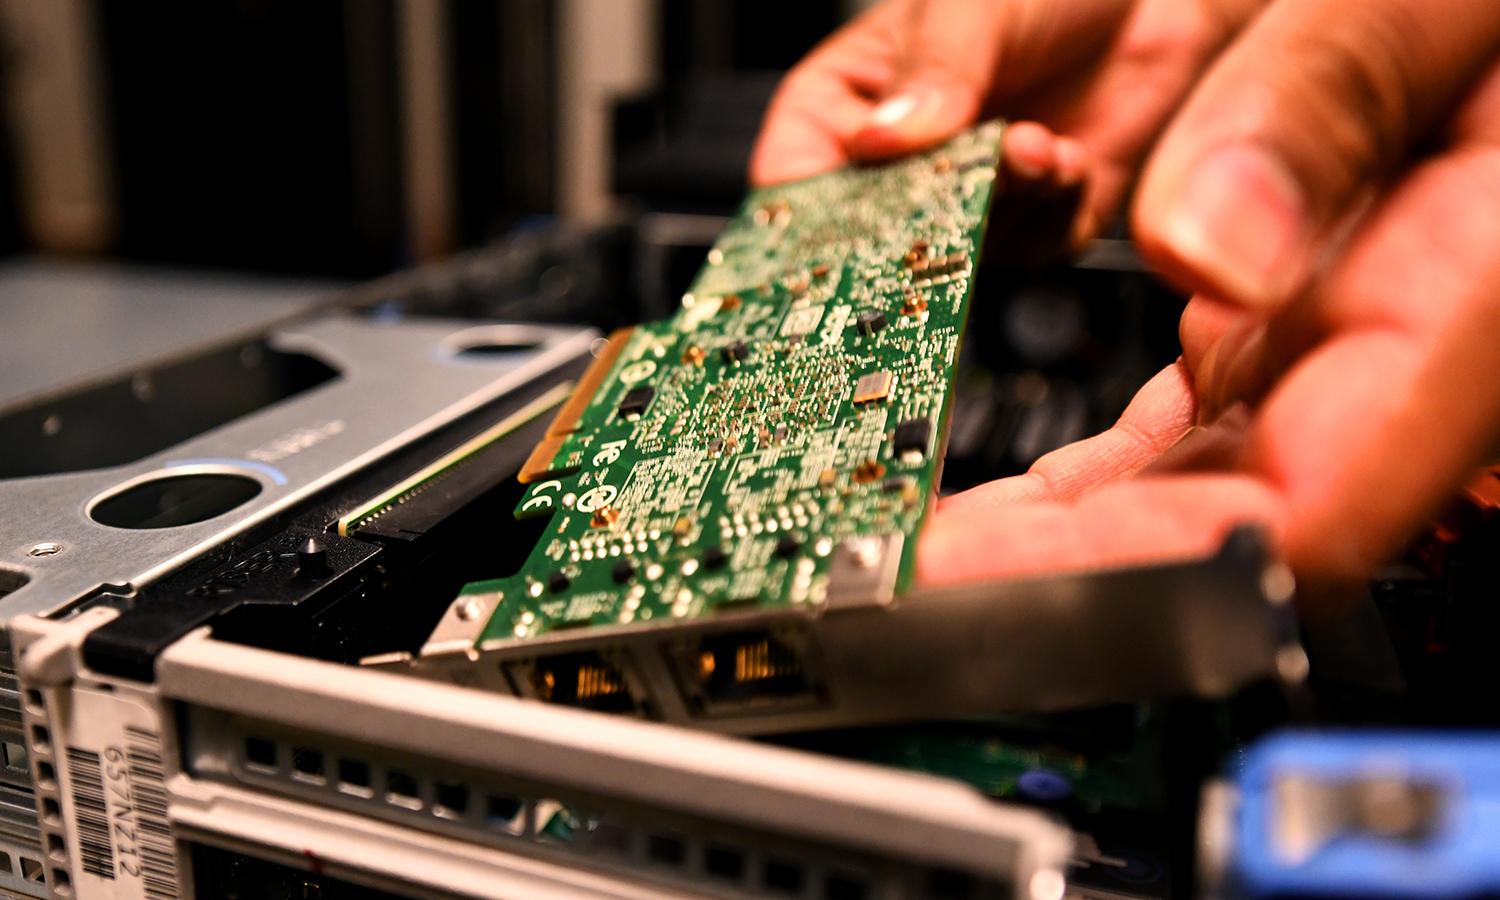 An Air Force information technology specialist replaces a circuit board during server maintenance, Sept. 22, 2021, at U.S. Army Garrison Humphreys, South Korea. (Air Force)